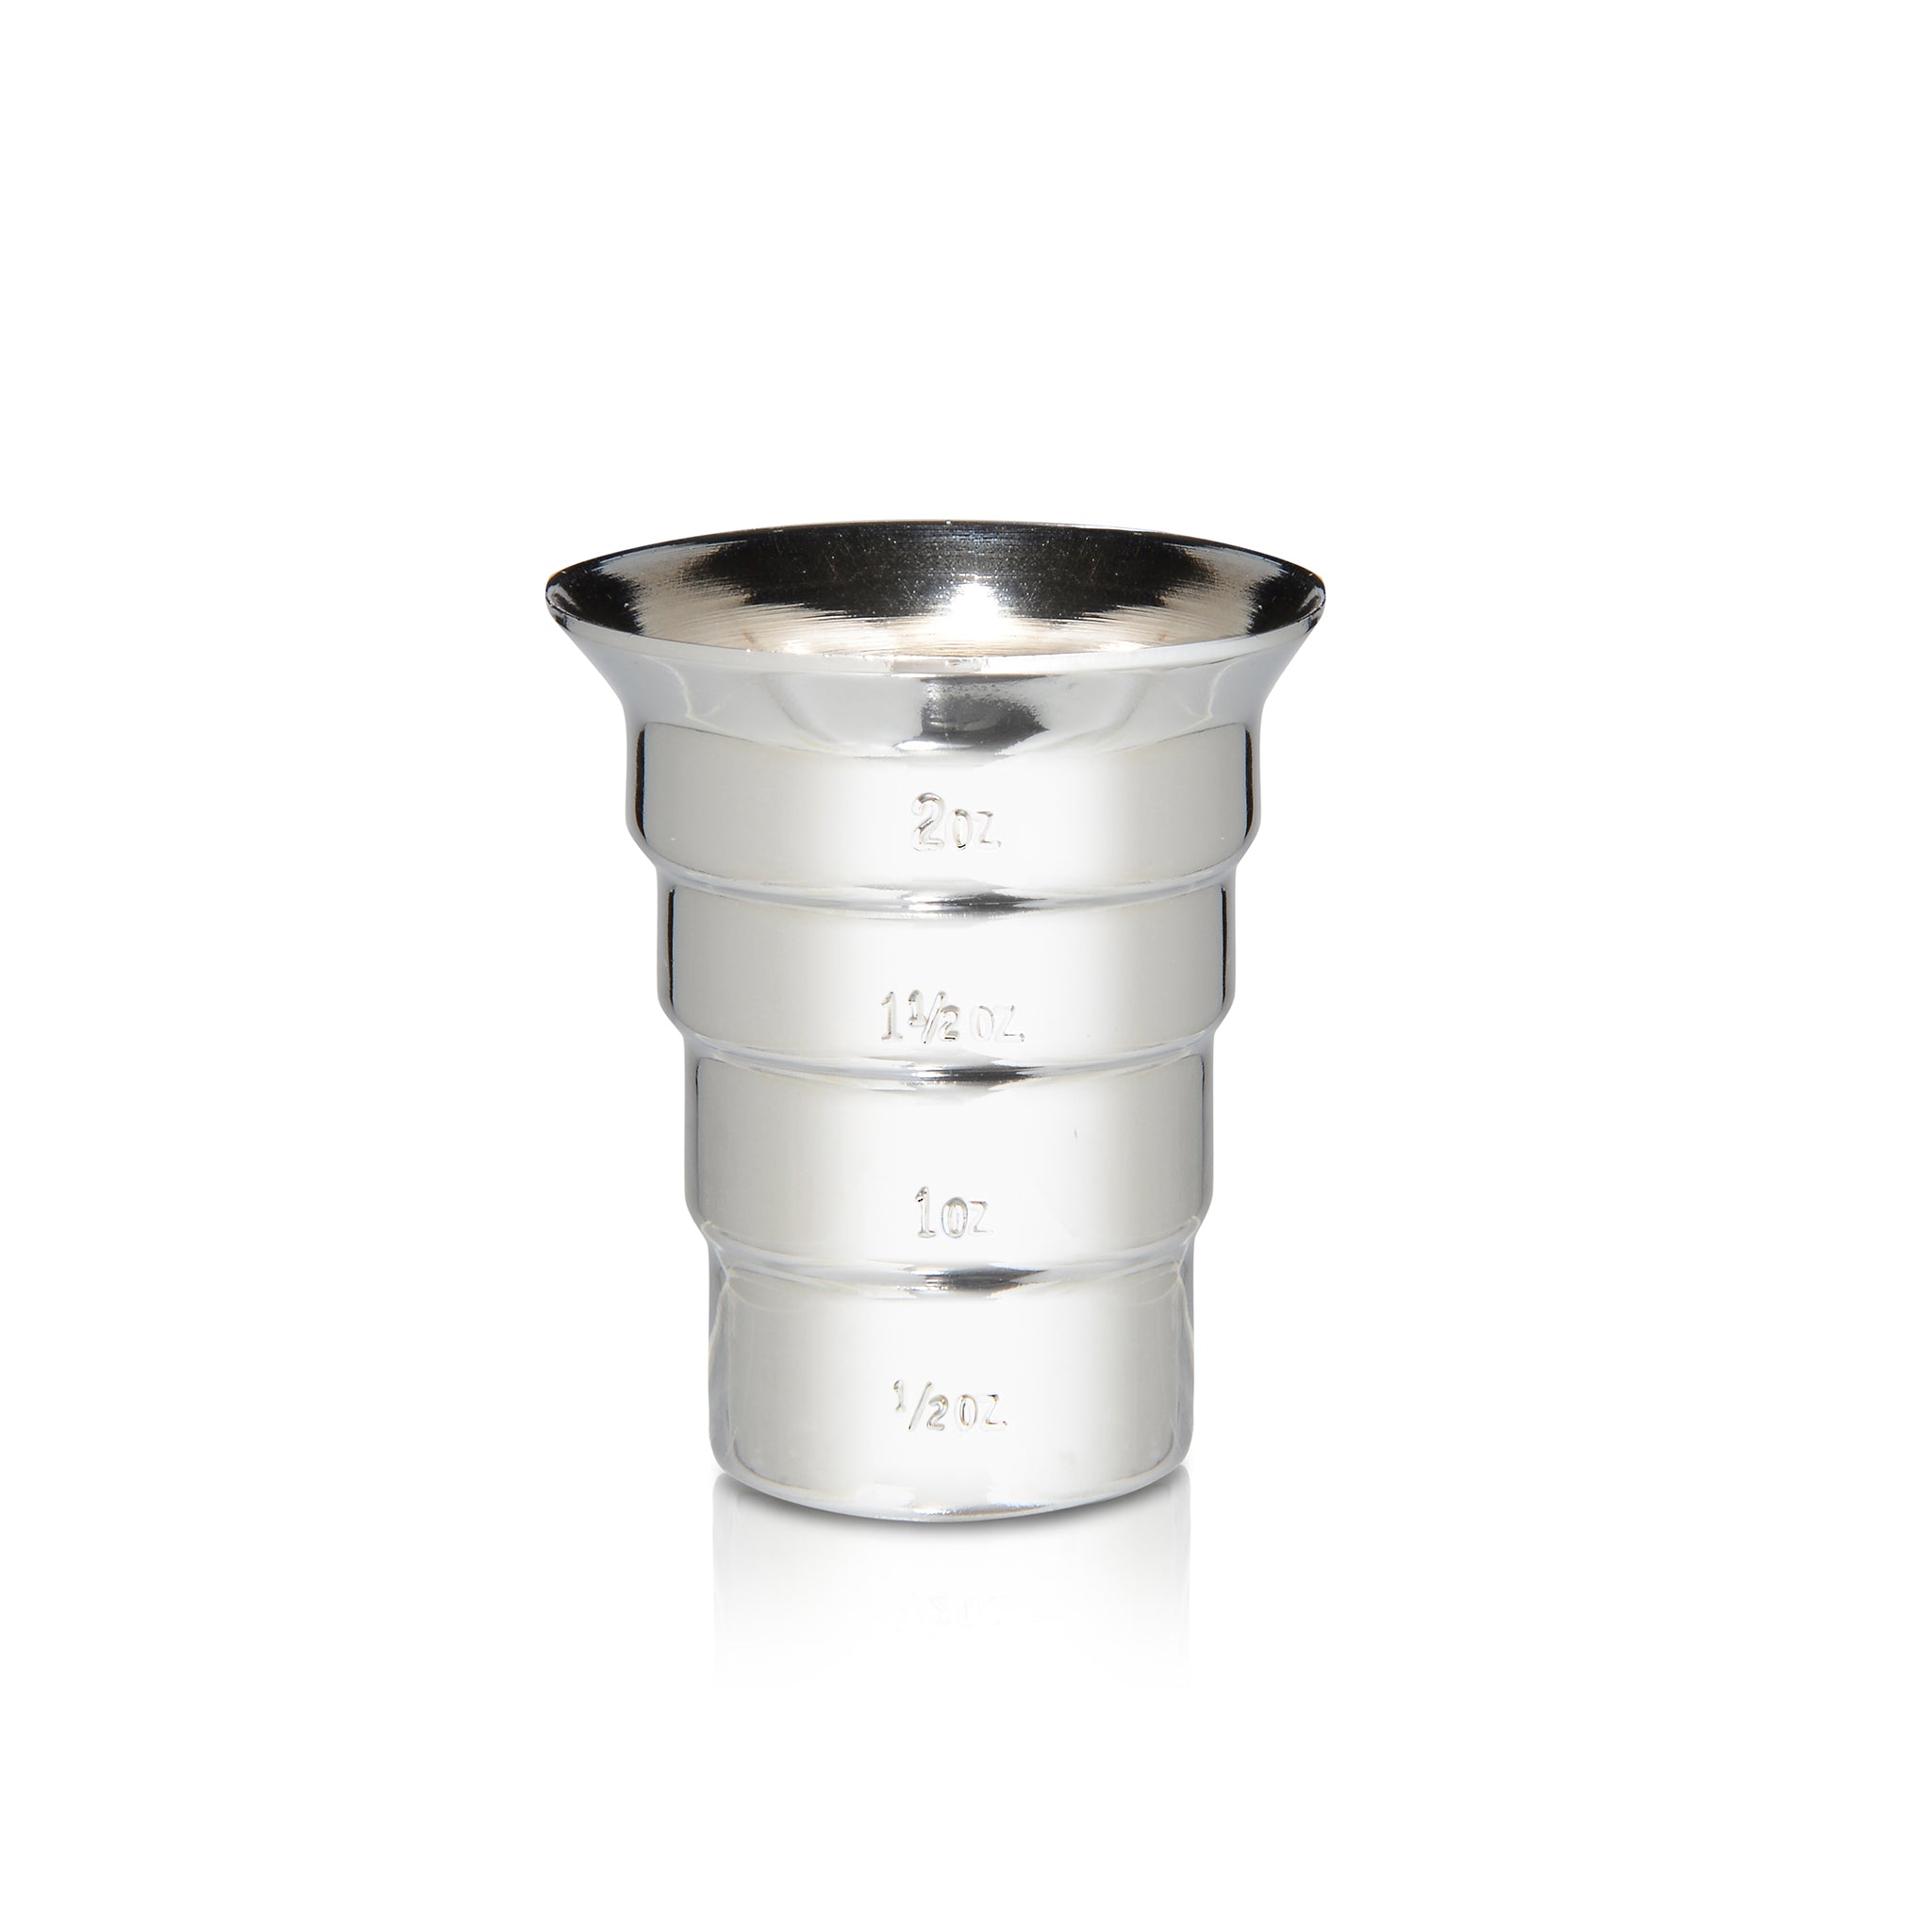 SoftWorks Stainless Steel Angled Jigger 2 oz 4 Tbsp Measuring Cup